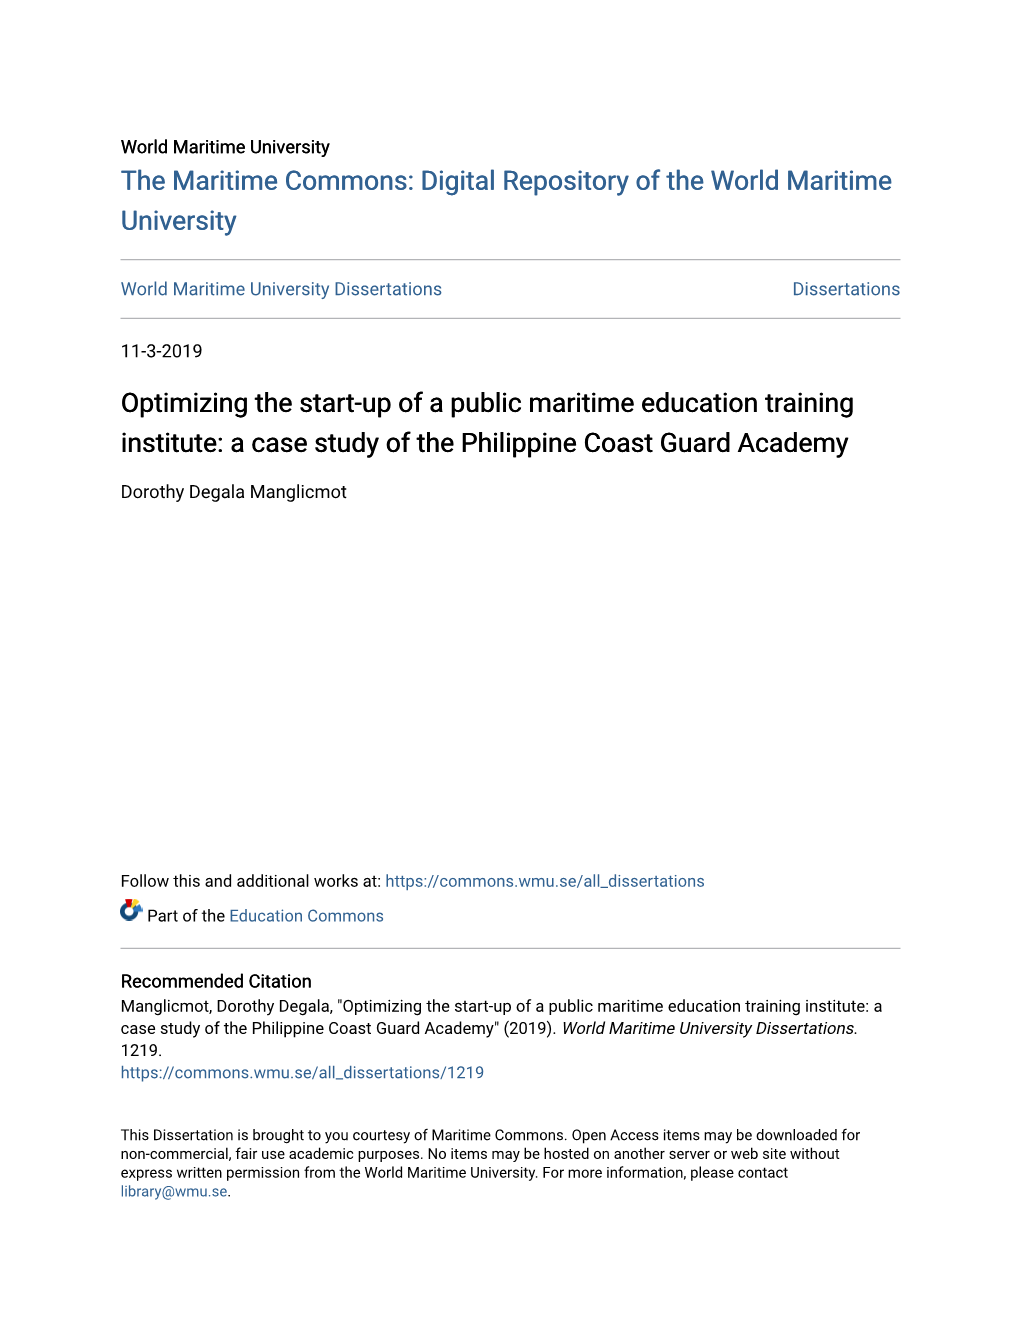 Optimizing the Start-Up of a Public Maritime Education Training Institute: a Case Study of the Philippine Coast Guard Academy